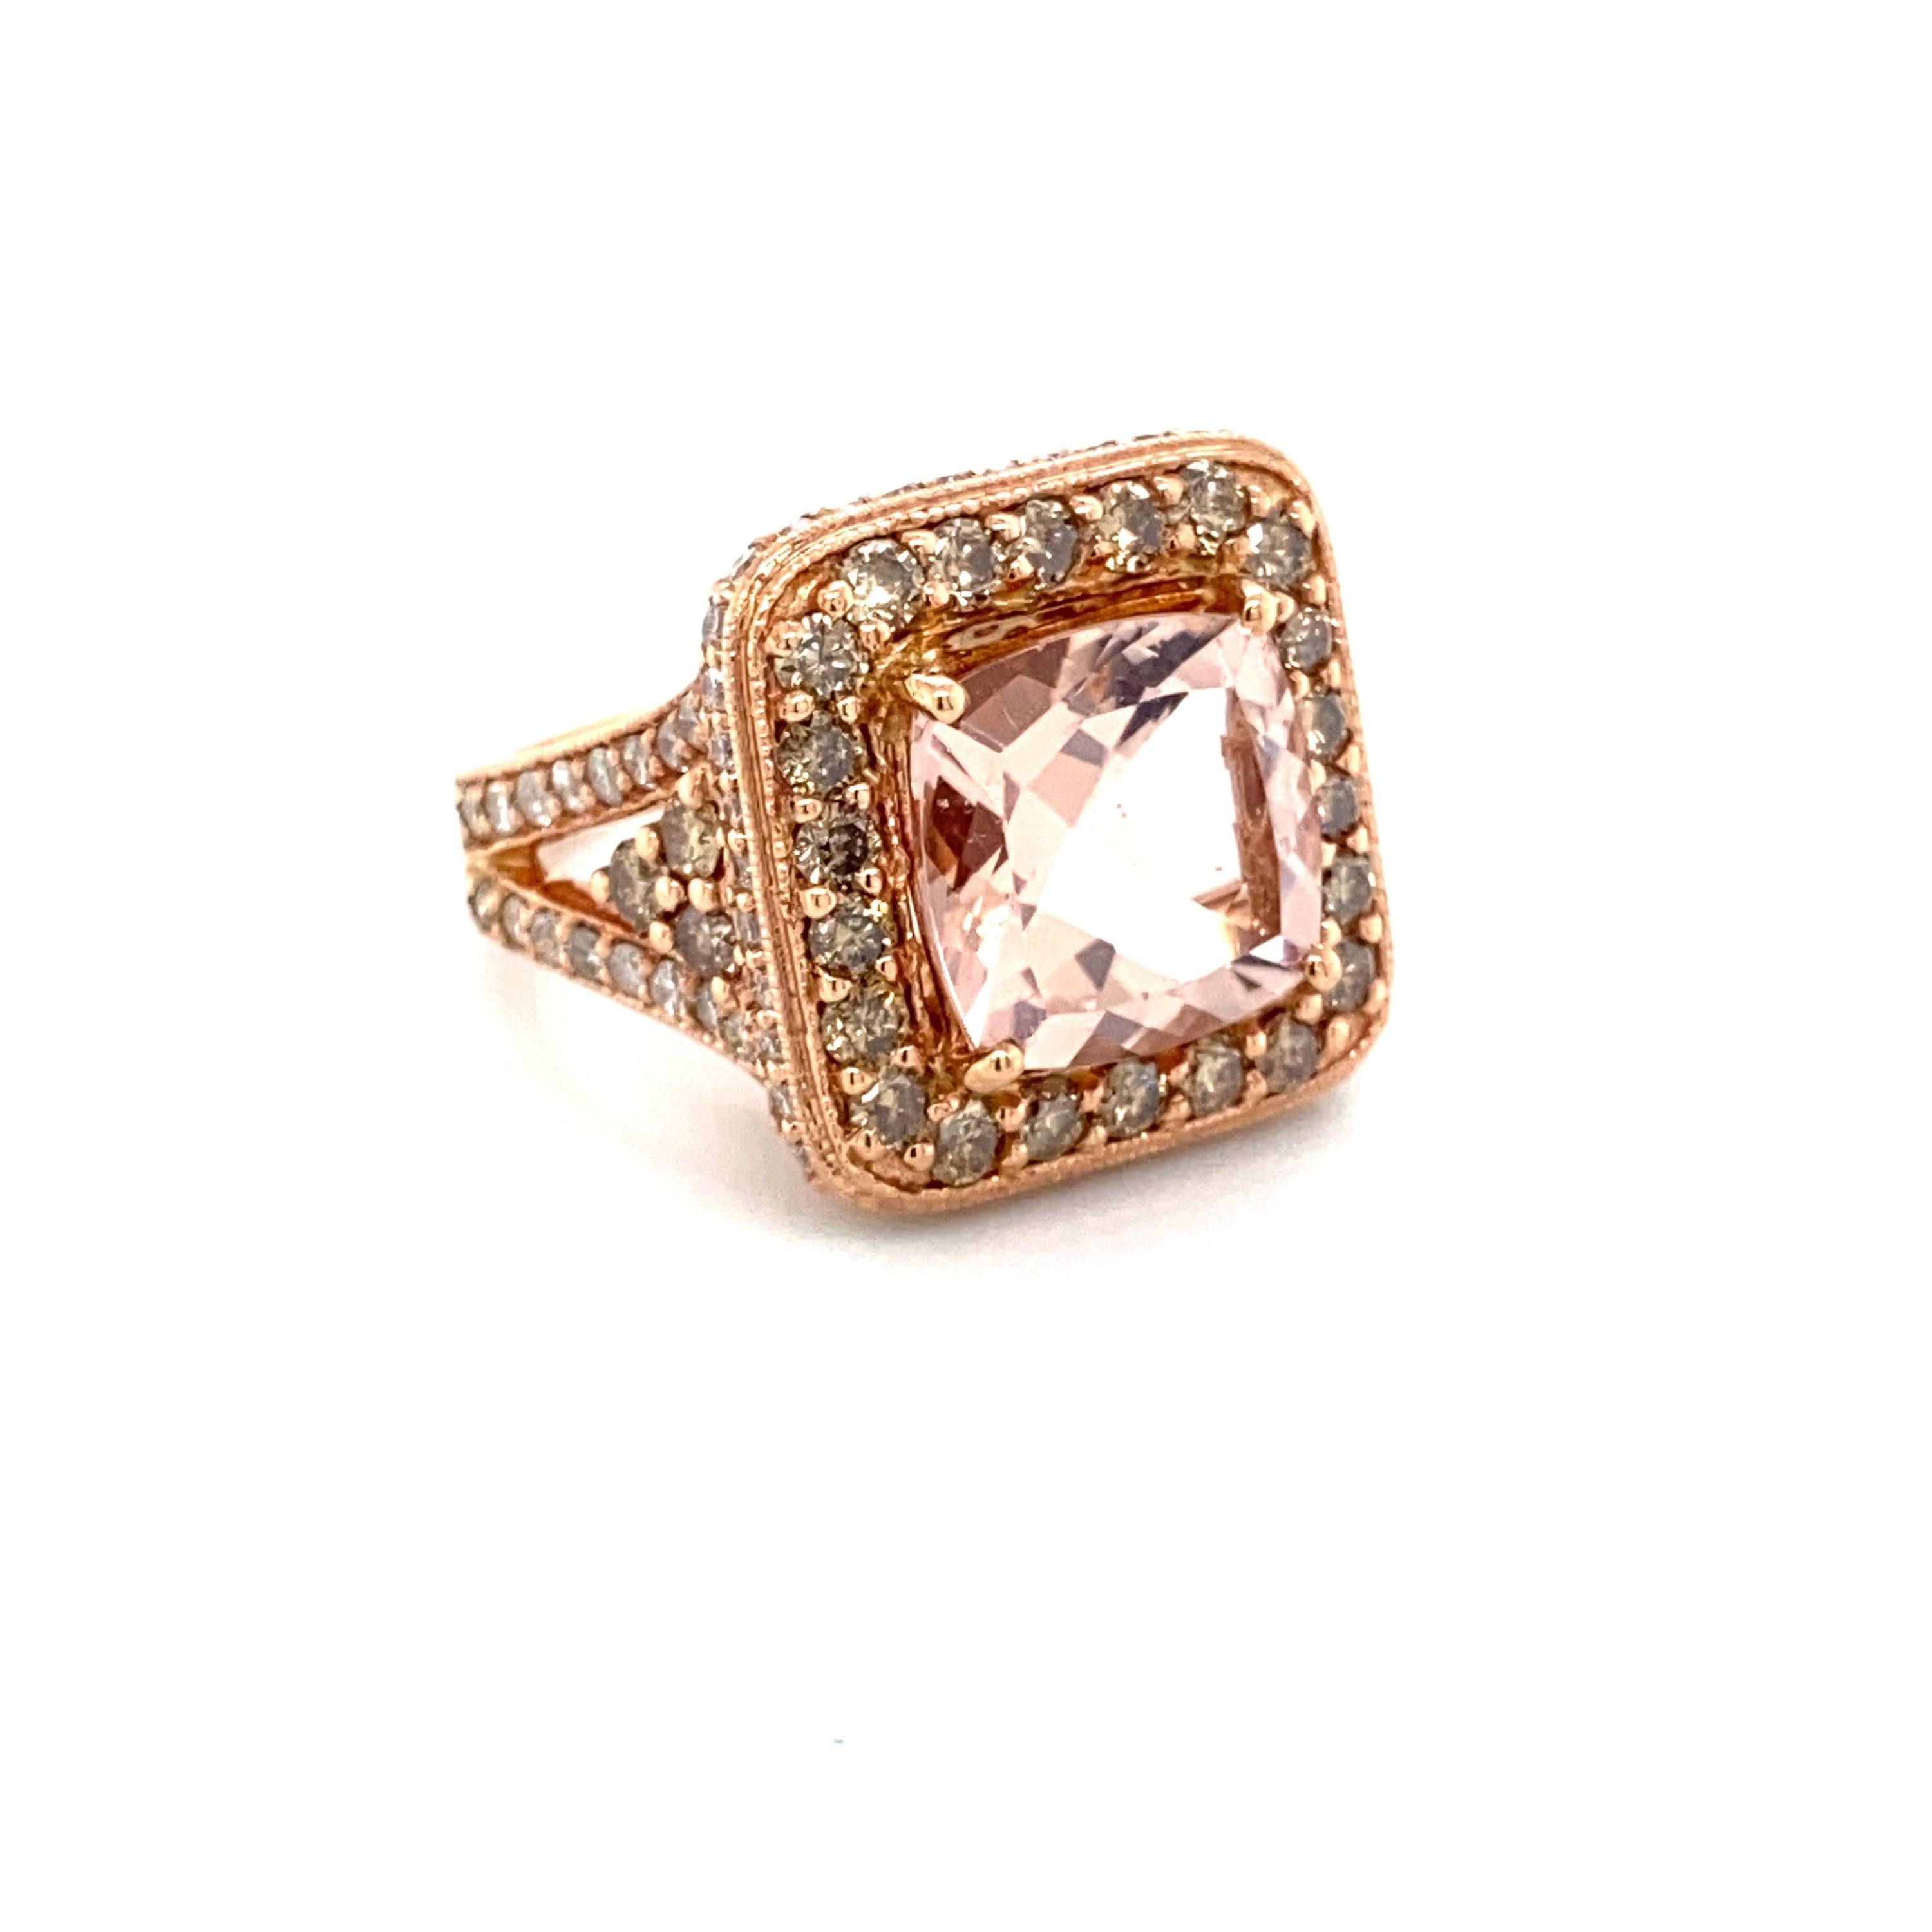 This is a stunning natural morganite and diamond halo ring set in solid 14K rose gold. The natural 11MM Cushion cut 5.10ct morganite has an excellent peachy pink color (5.10 carats of a AAA quality gem!) and is surrounded by a halo of round cut